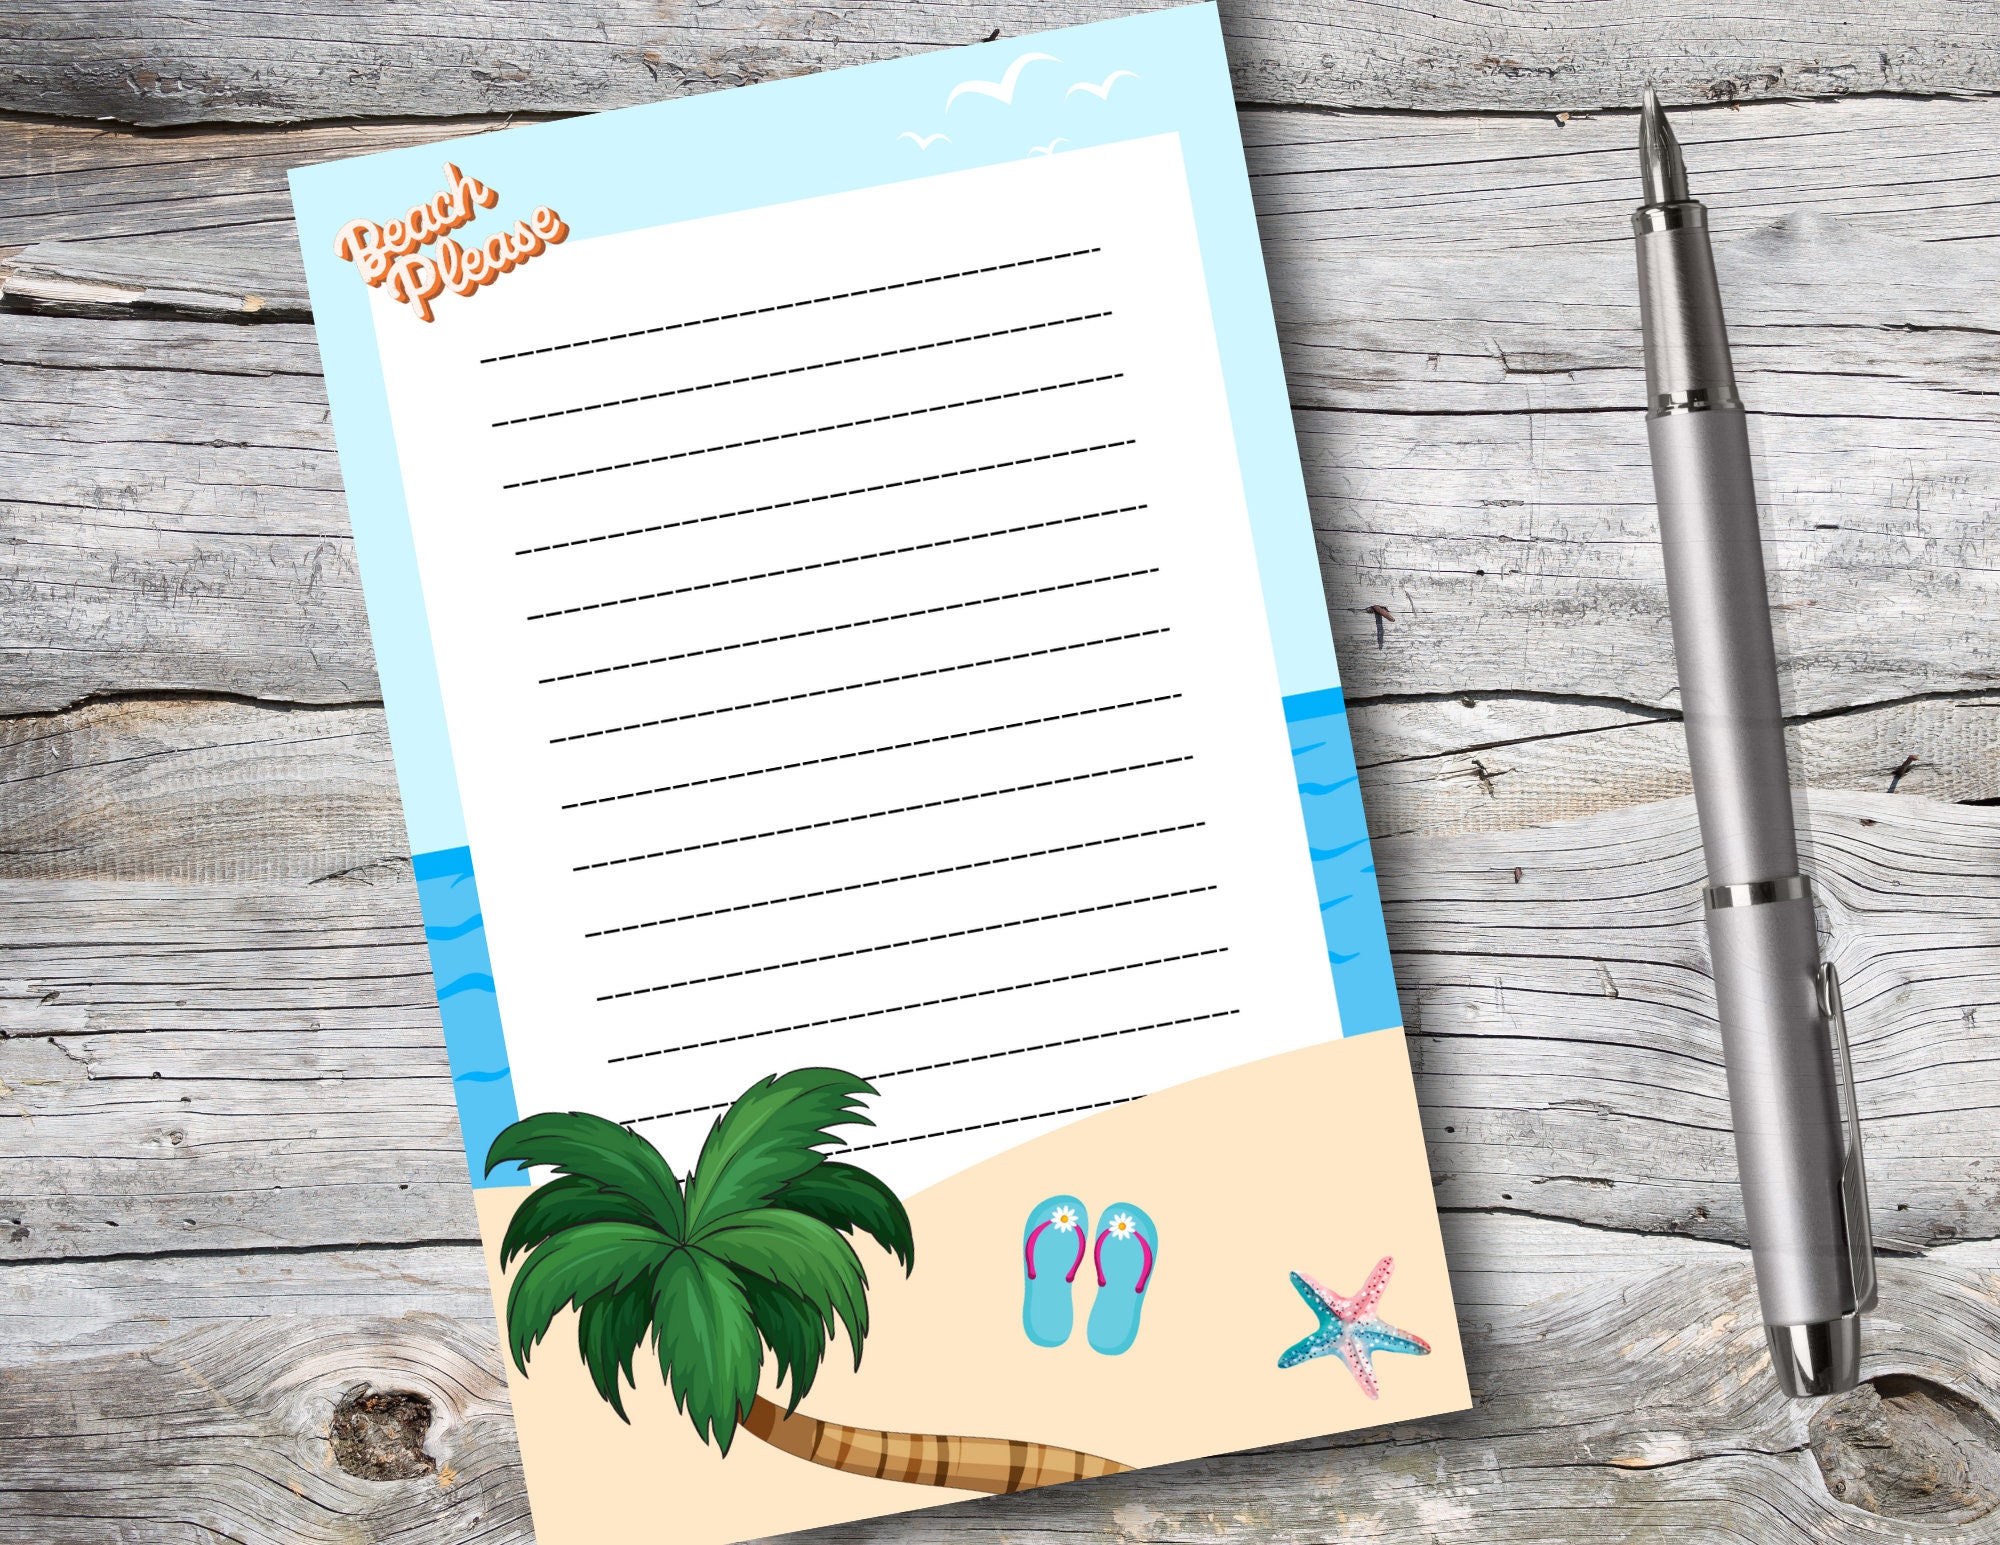 Buy wholesale Theme notebook TO DO LIST - WHITE PALM TREE